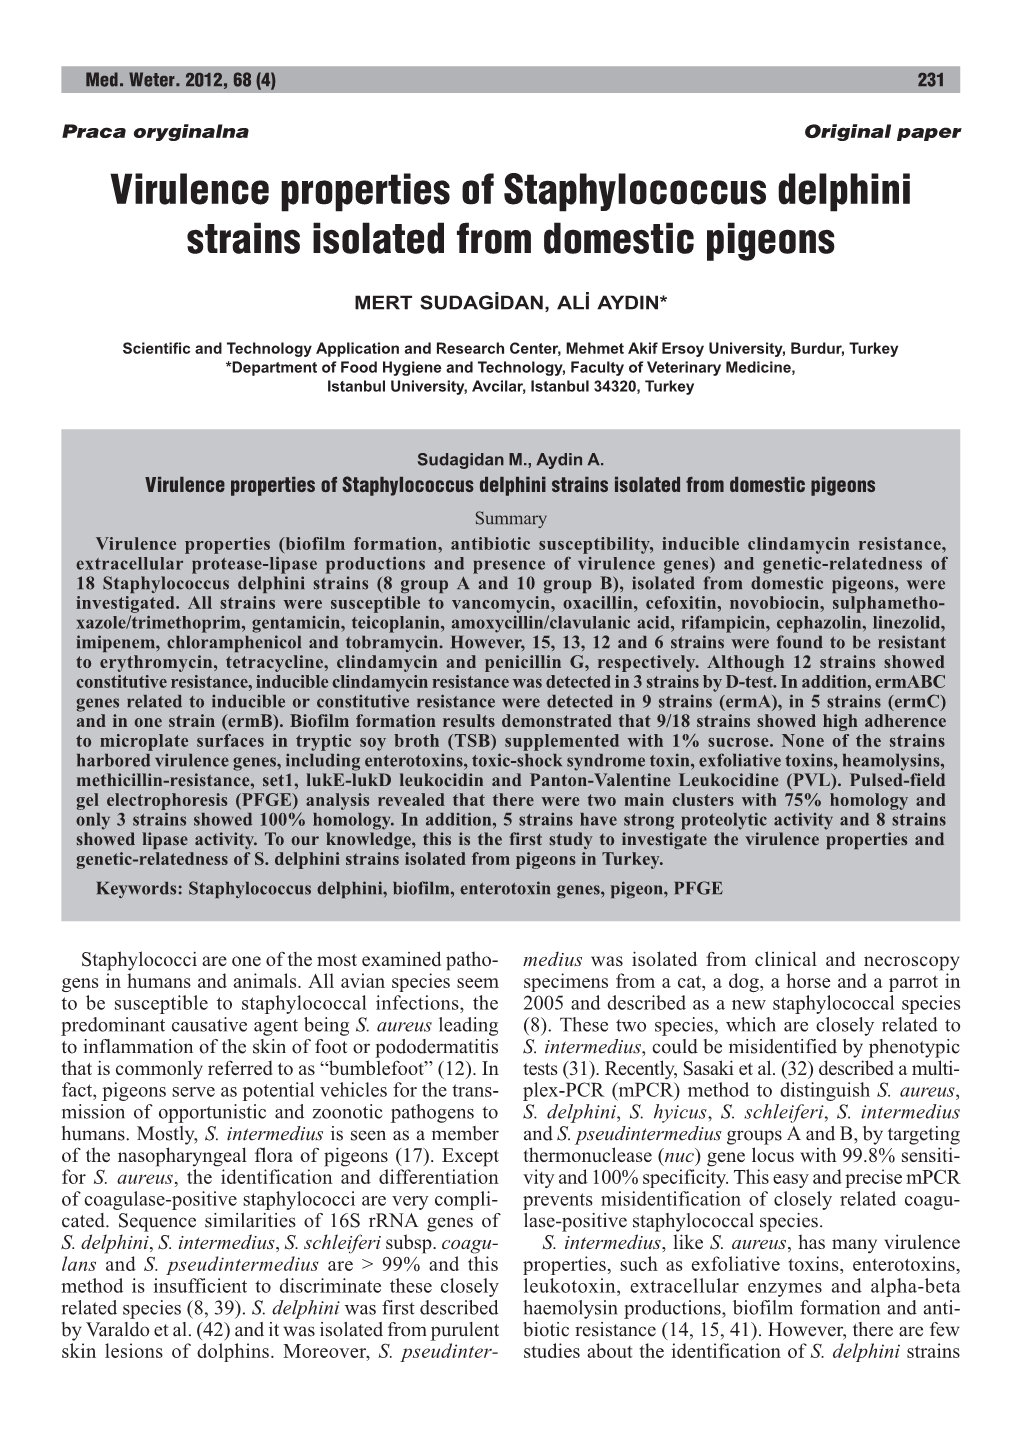 Virulence Properties of Staphylococcus Delphini Strains Isolated from Domestic Pigeons